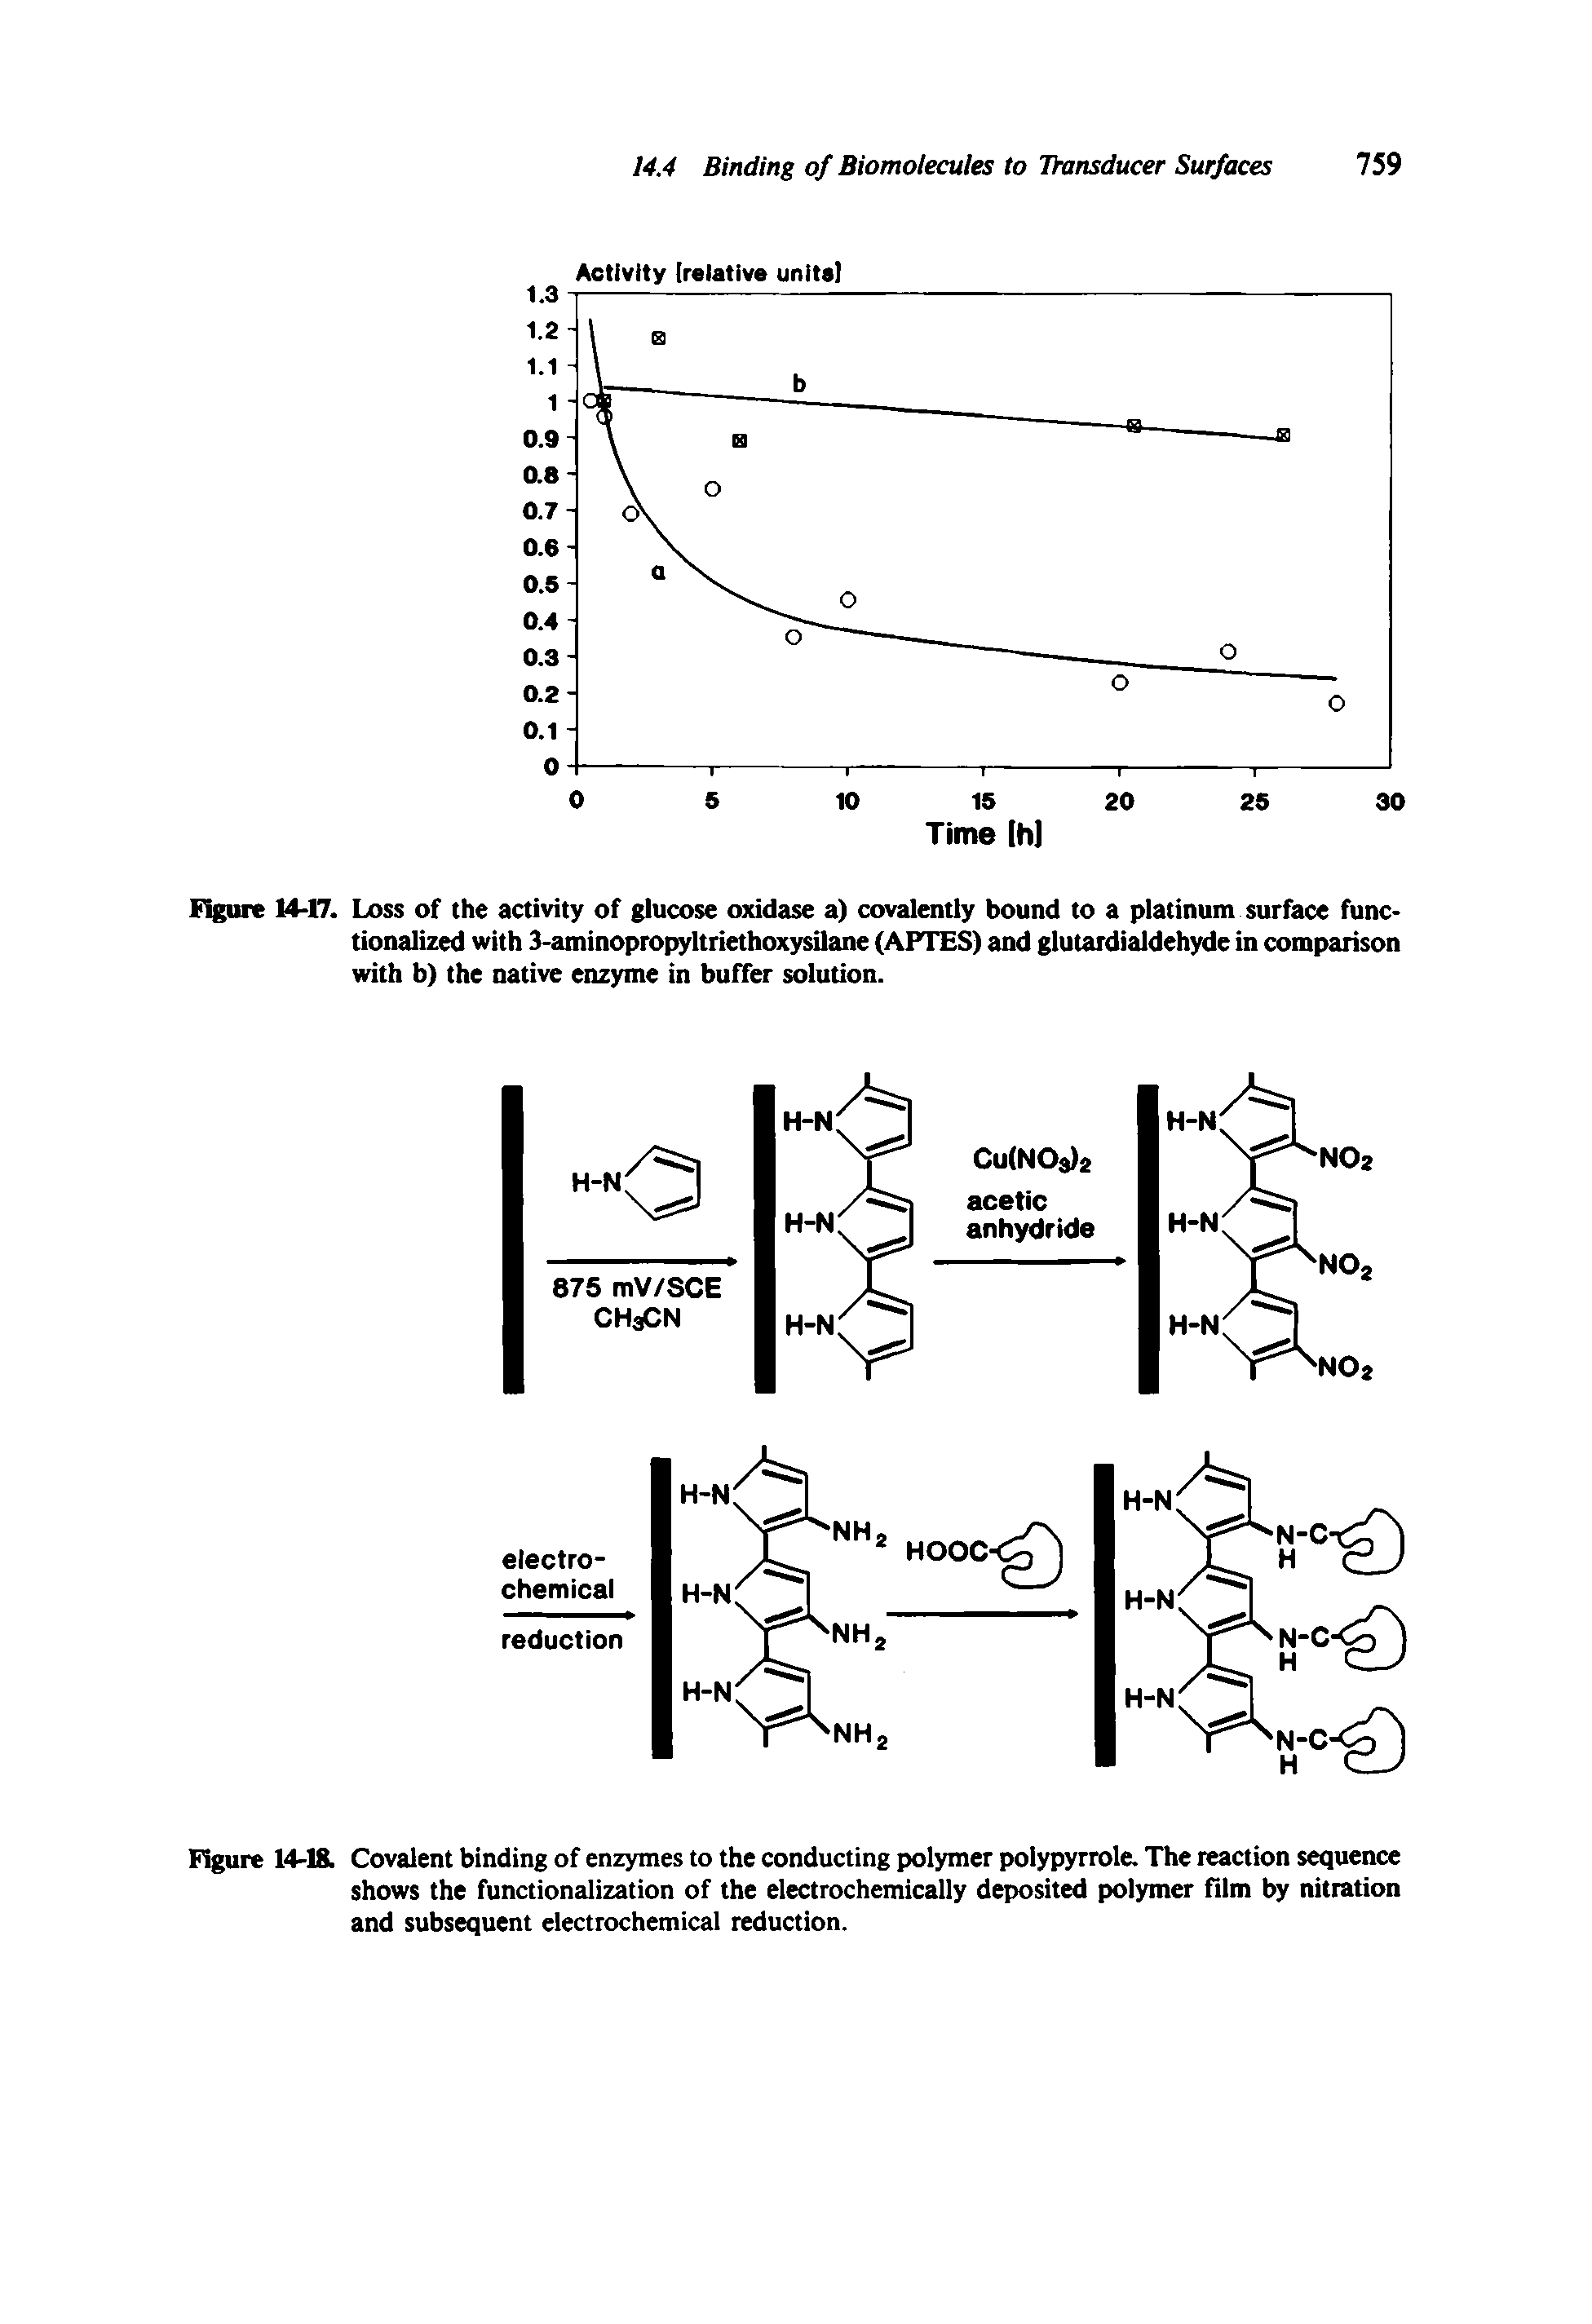 Figure 14-18. Covalent binding of enzymes to the conducting polymer polypyrrole. The reaction sequence shows the functionalization of the electrochemically deposited polymer film by nitration and subsequent electrochemical reduction.